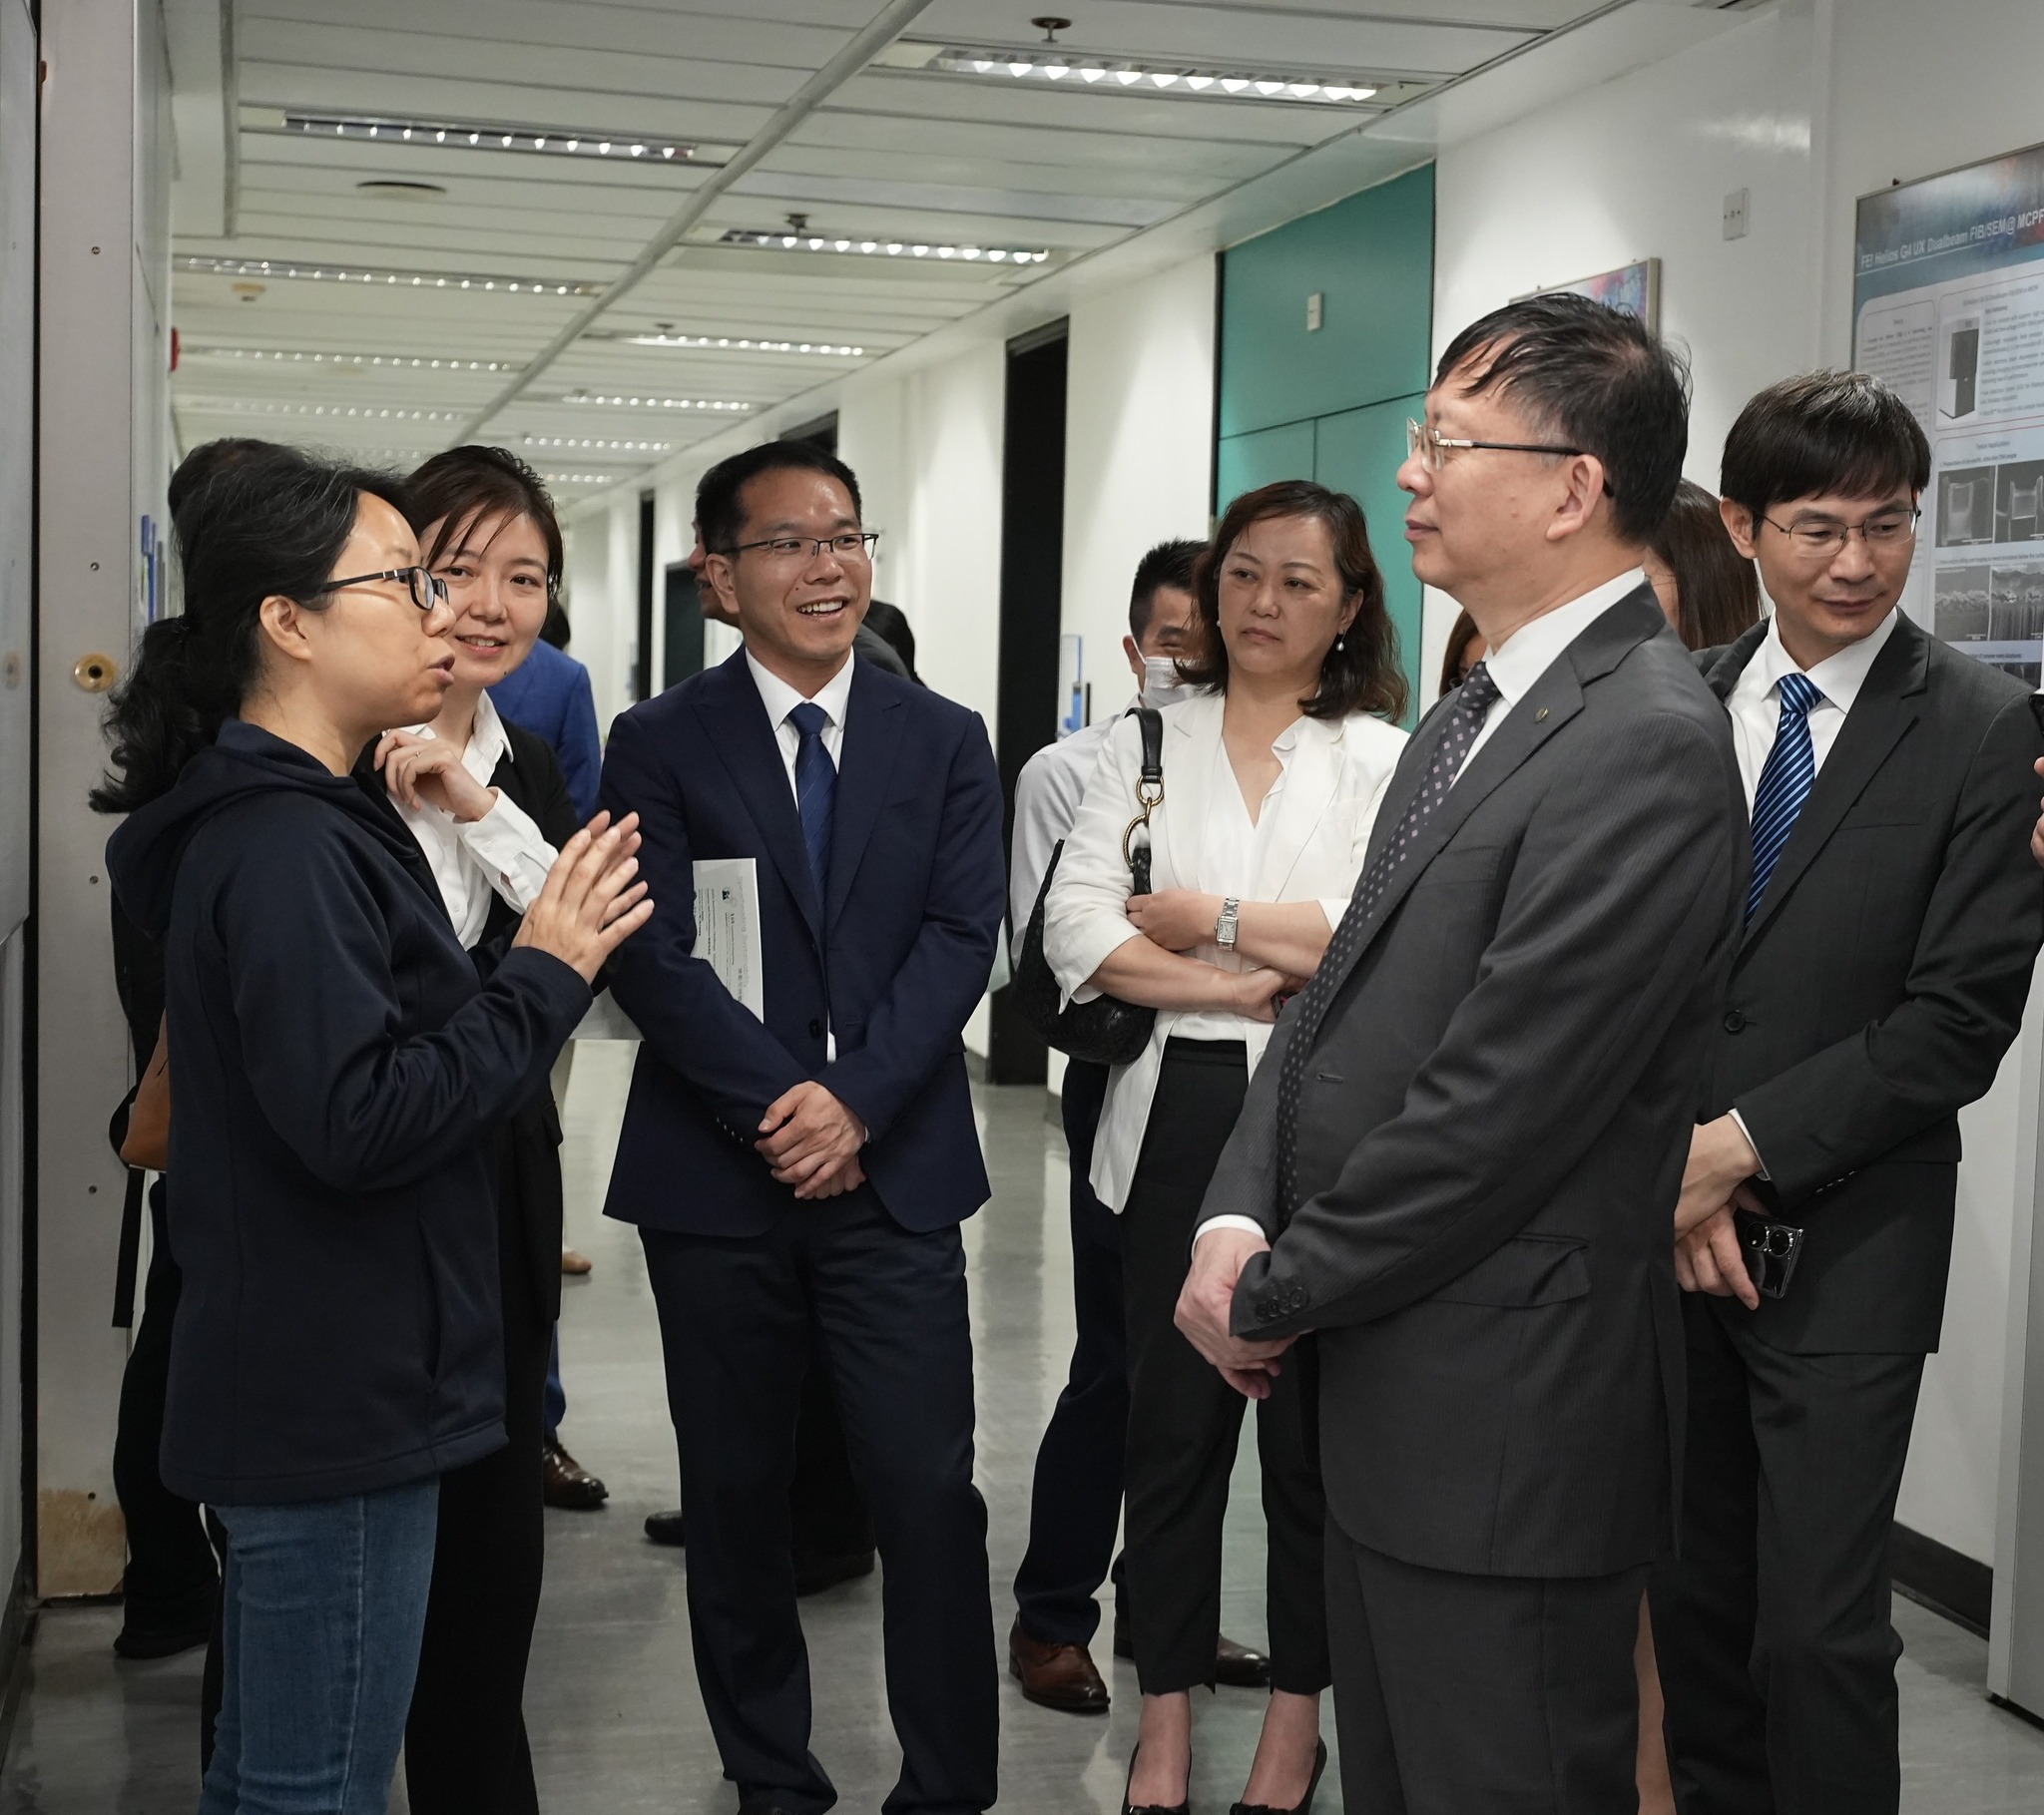 The Tongji University delegation visited the Materials Characterization and Preparation Facility.